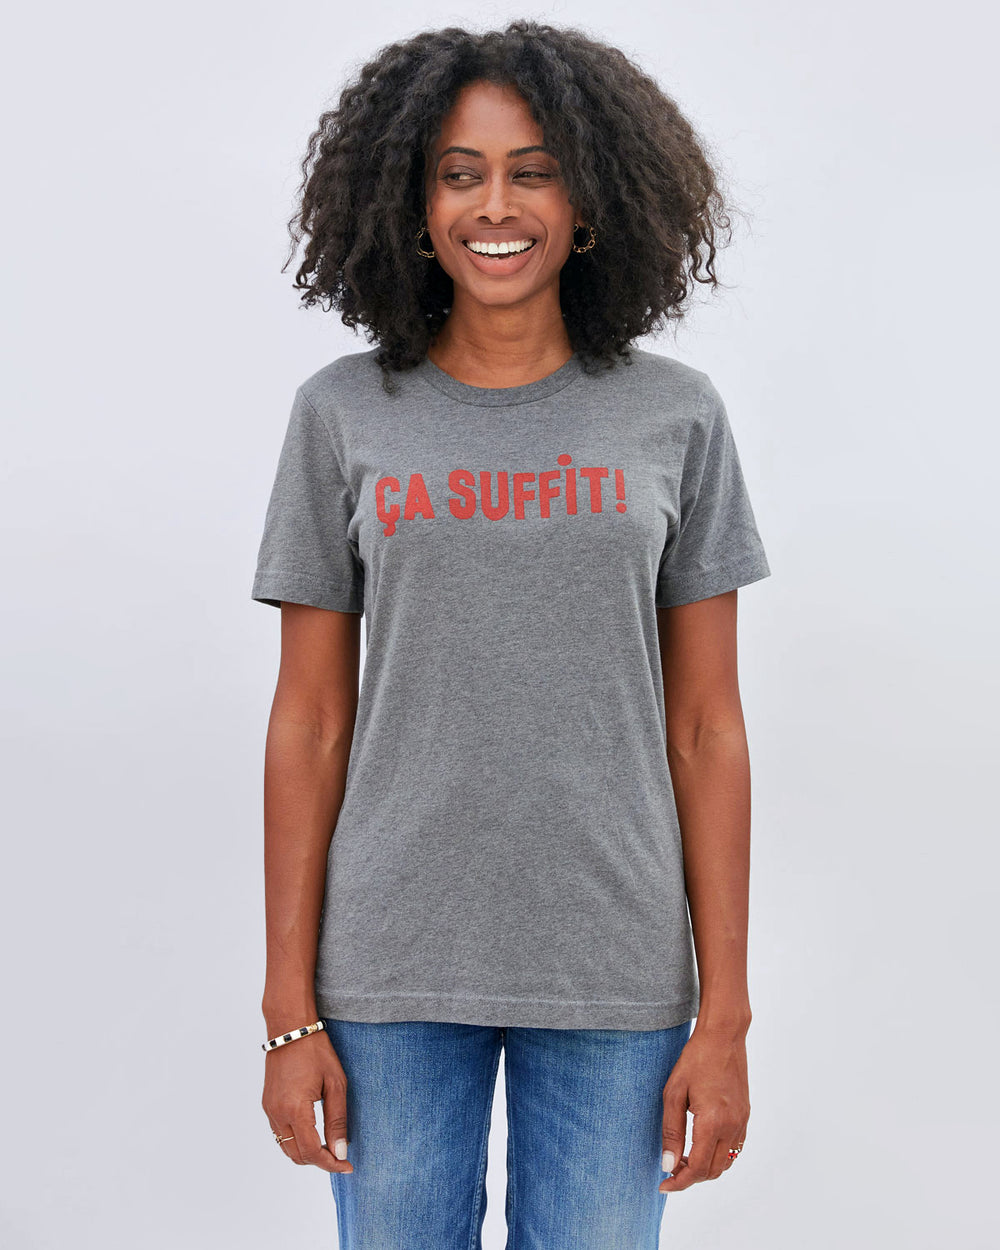 Mecca wearing the Ca Suffit Original Tee untucked with denim jeans. 